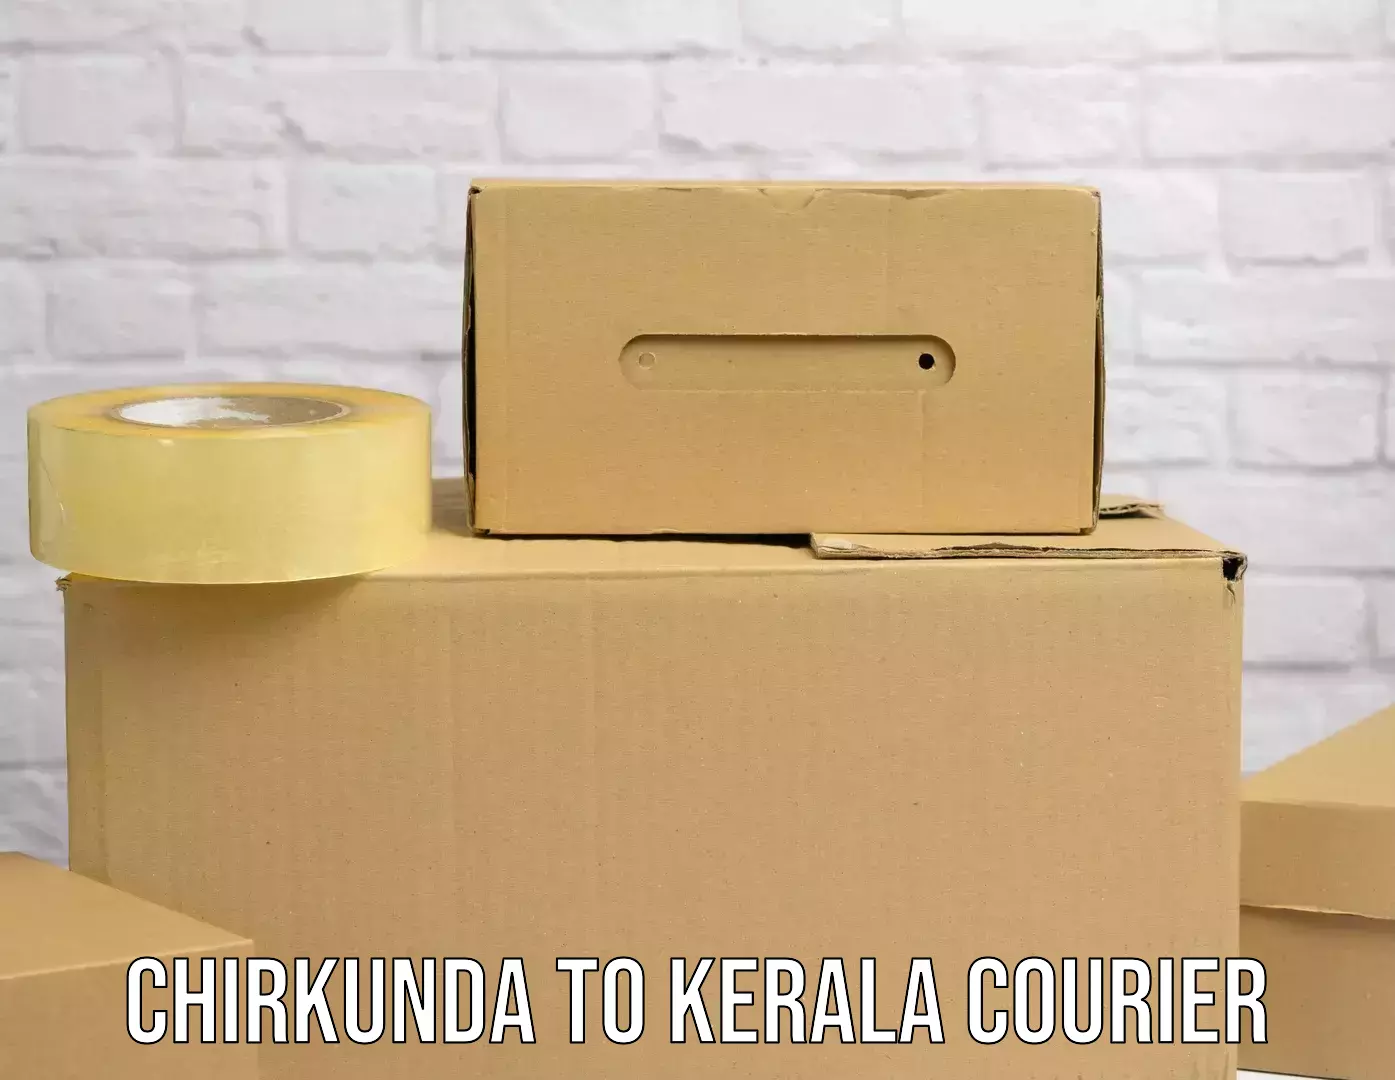 Nationwide delivery network Chirkunda to Kerala